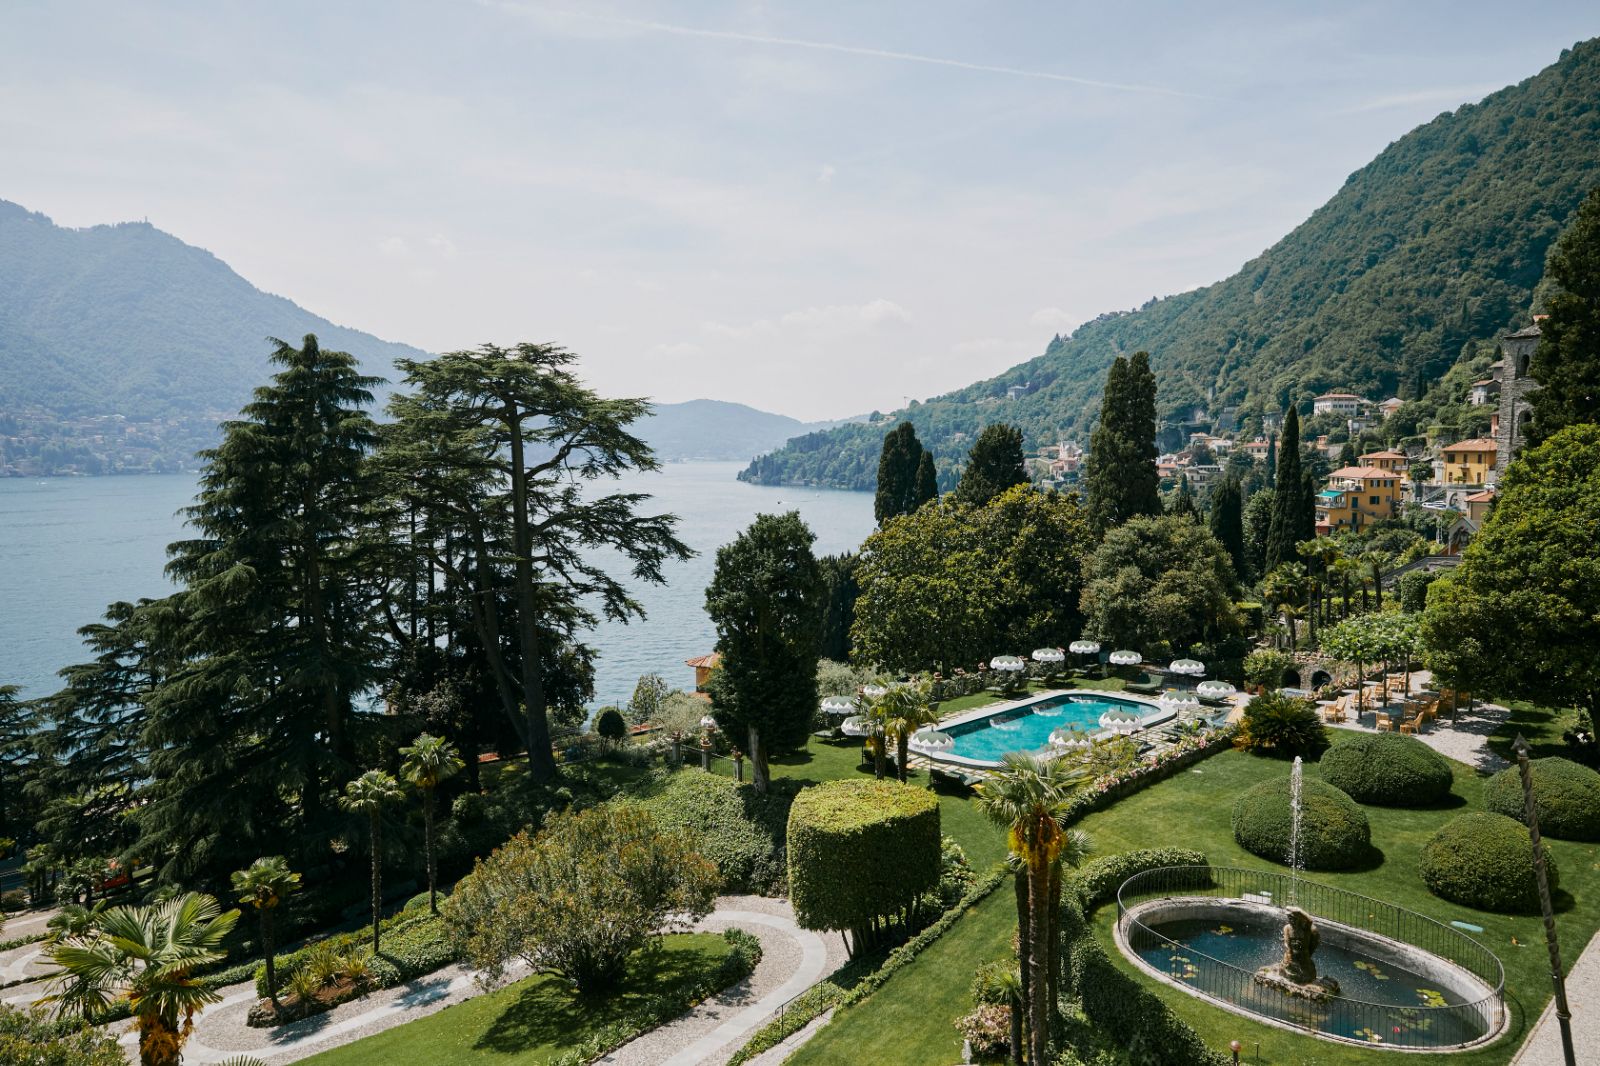 Aerial view of grounds and pool of Passalacqua on Italy's Lake Como